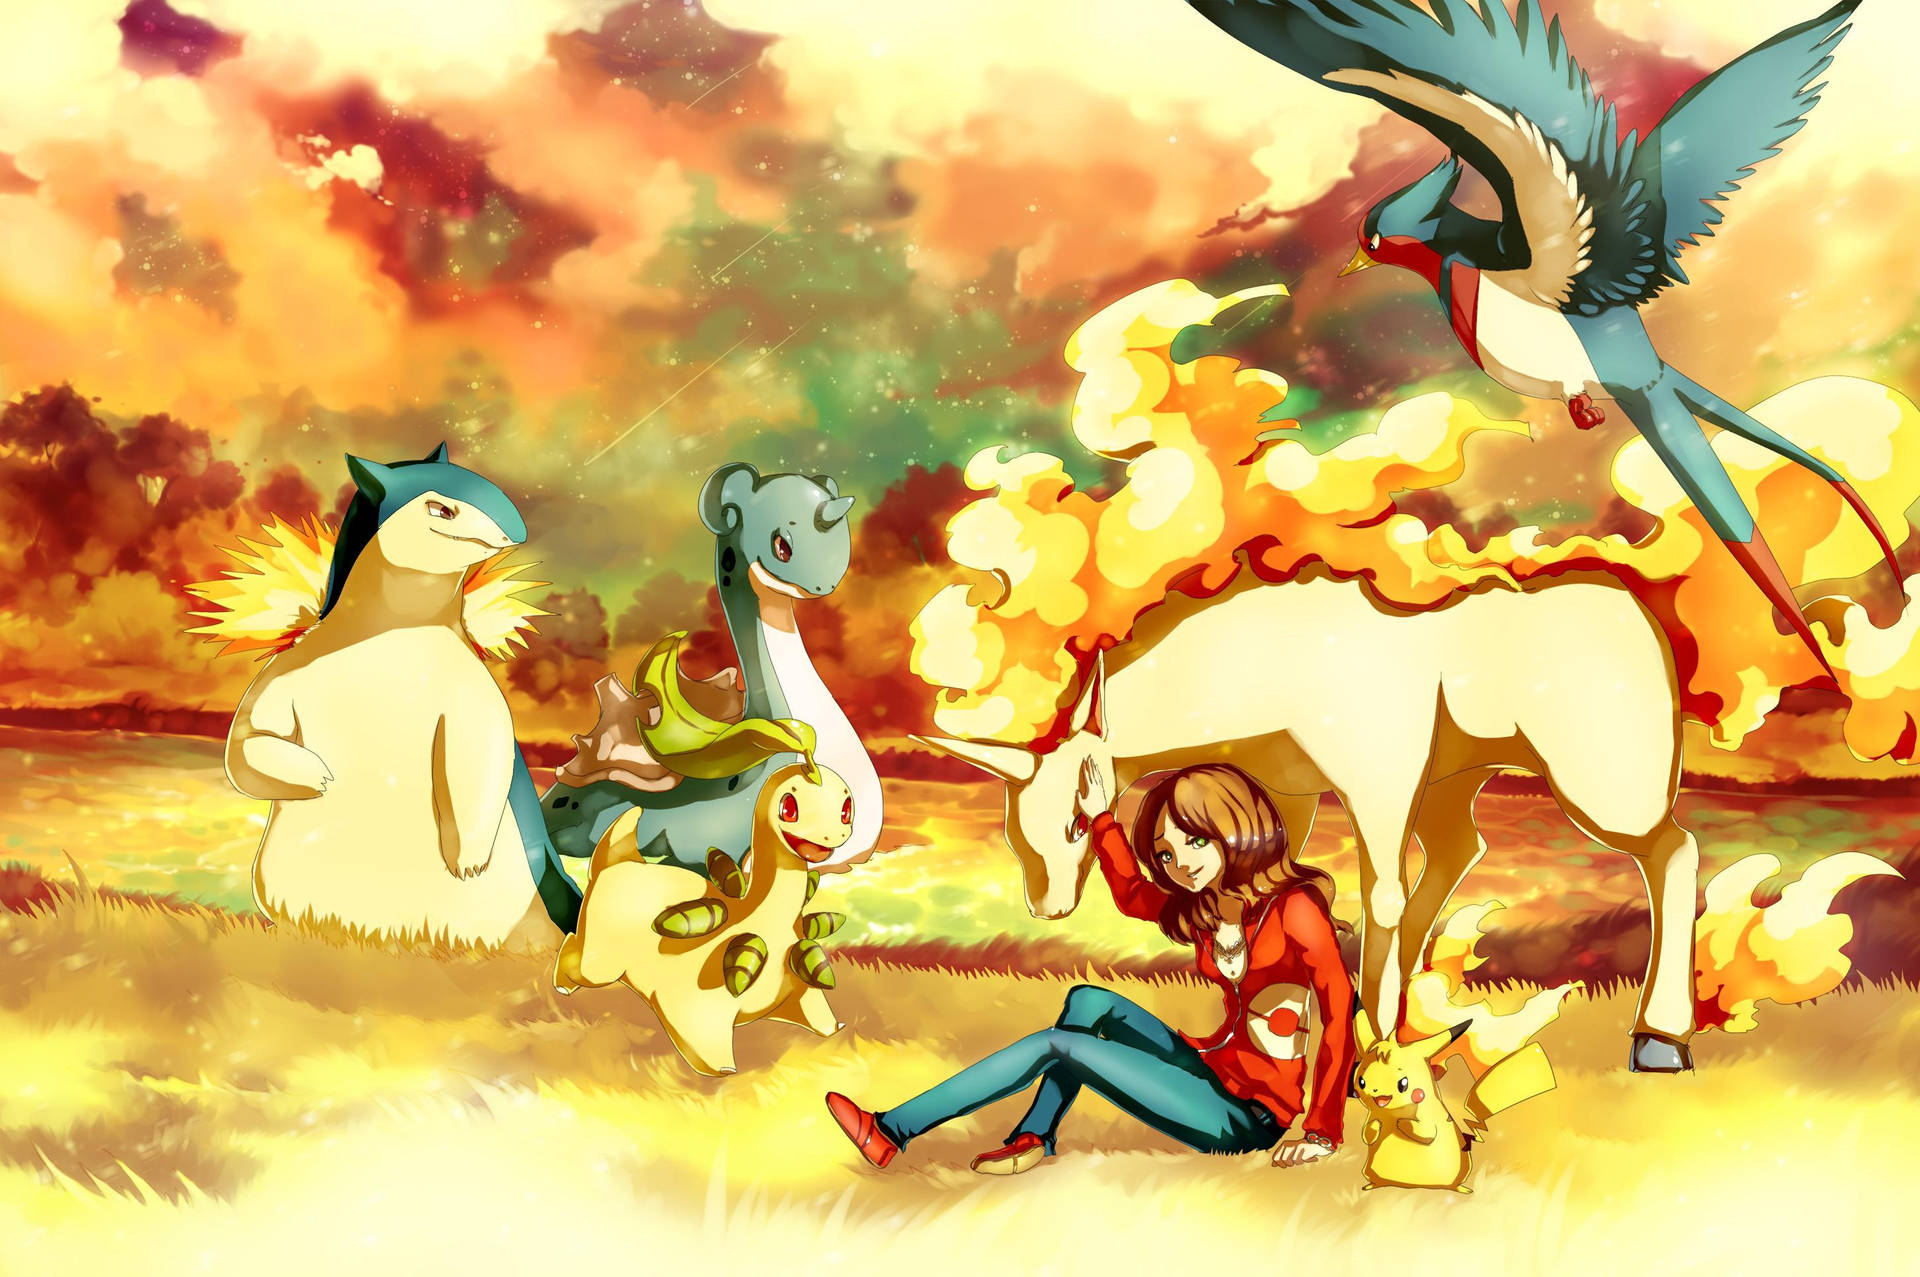 Majestic Lapras with Typhlosion and Other Pokémon in High Definition Wallpaper